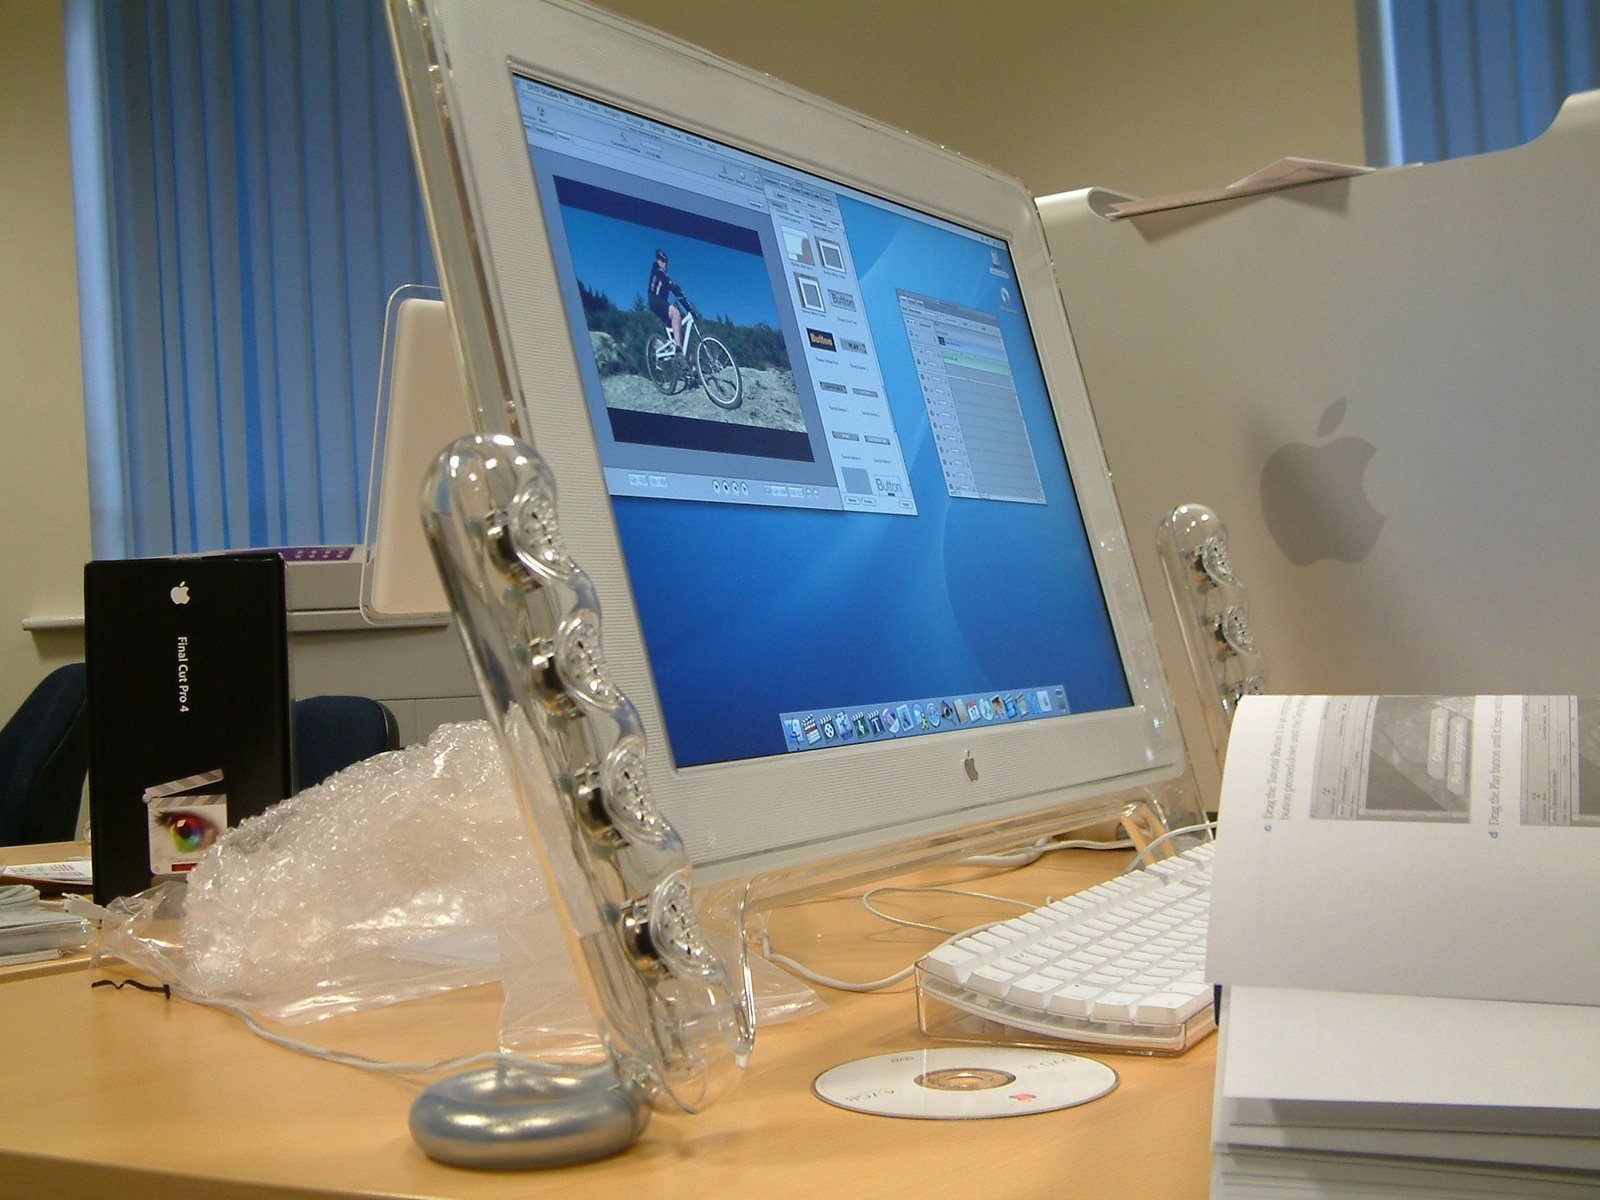 an apple computer in a white box with the keyboard, mouse and other items